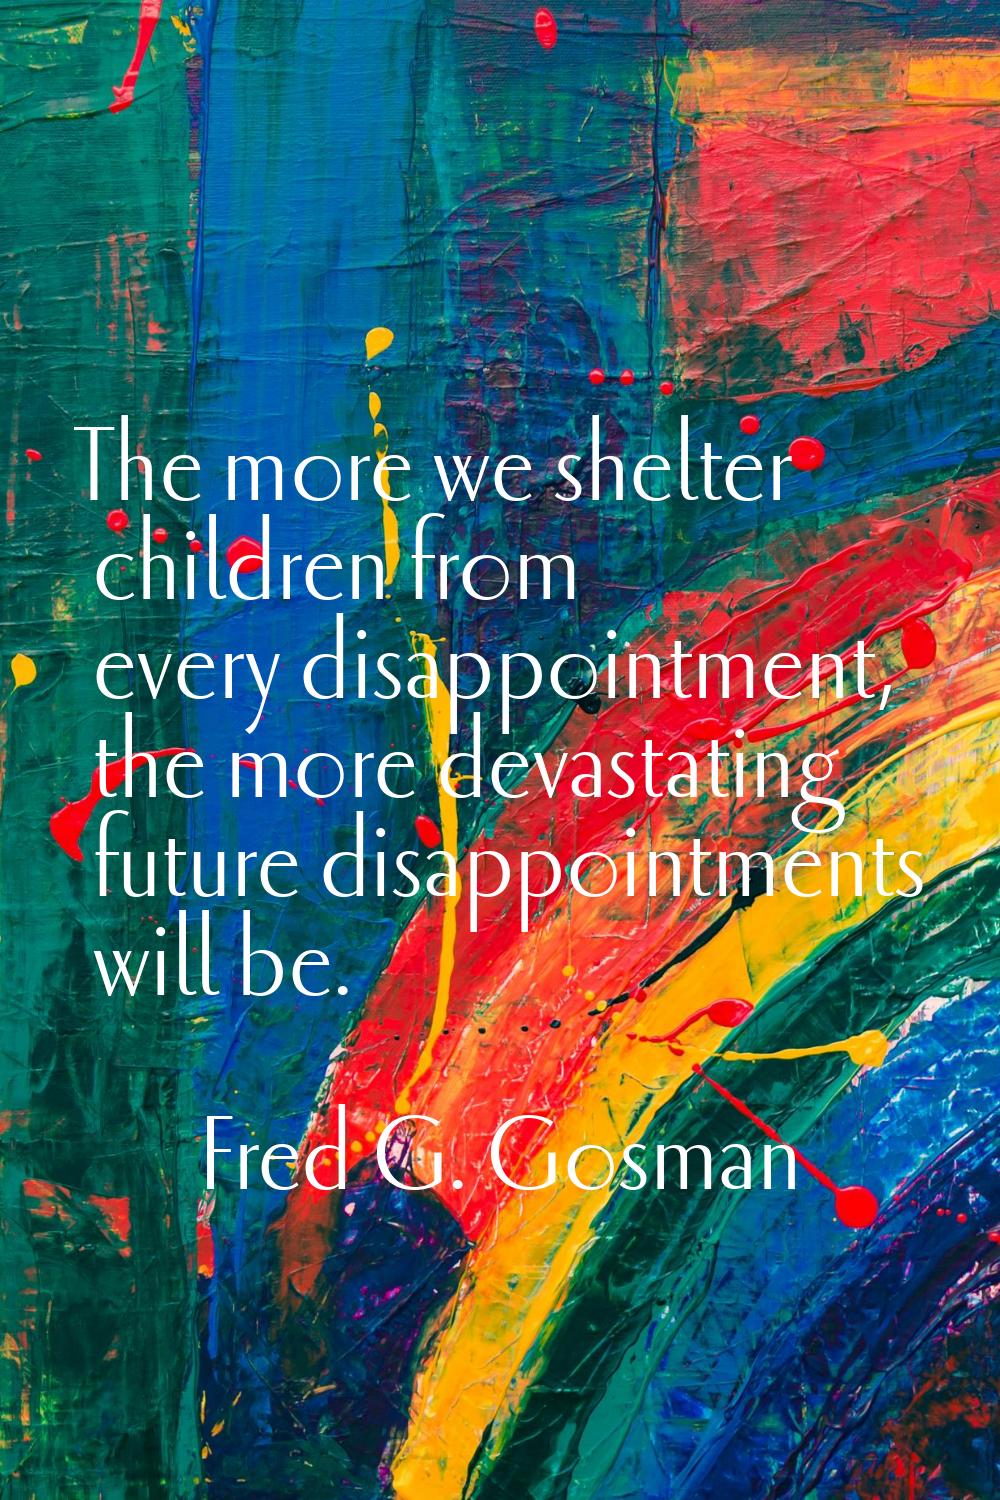 The more we shelter children from every disappointment, the more devastating future disappointments